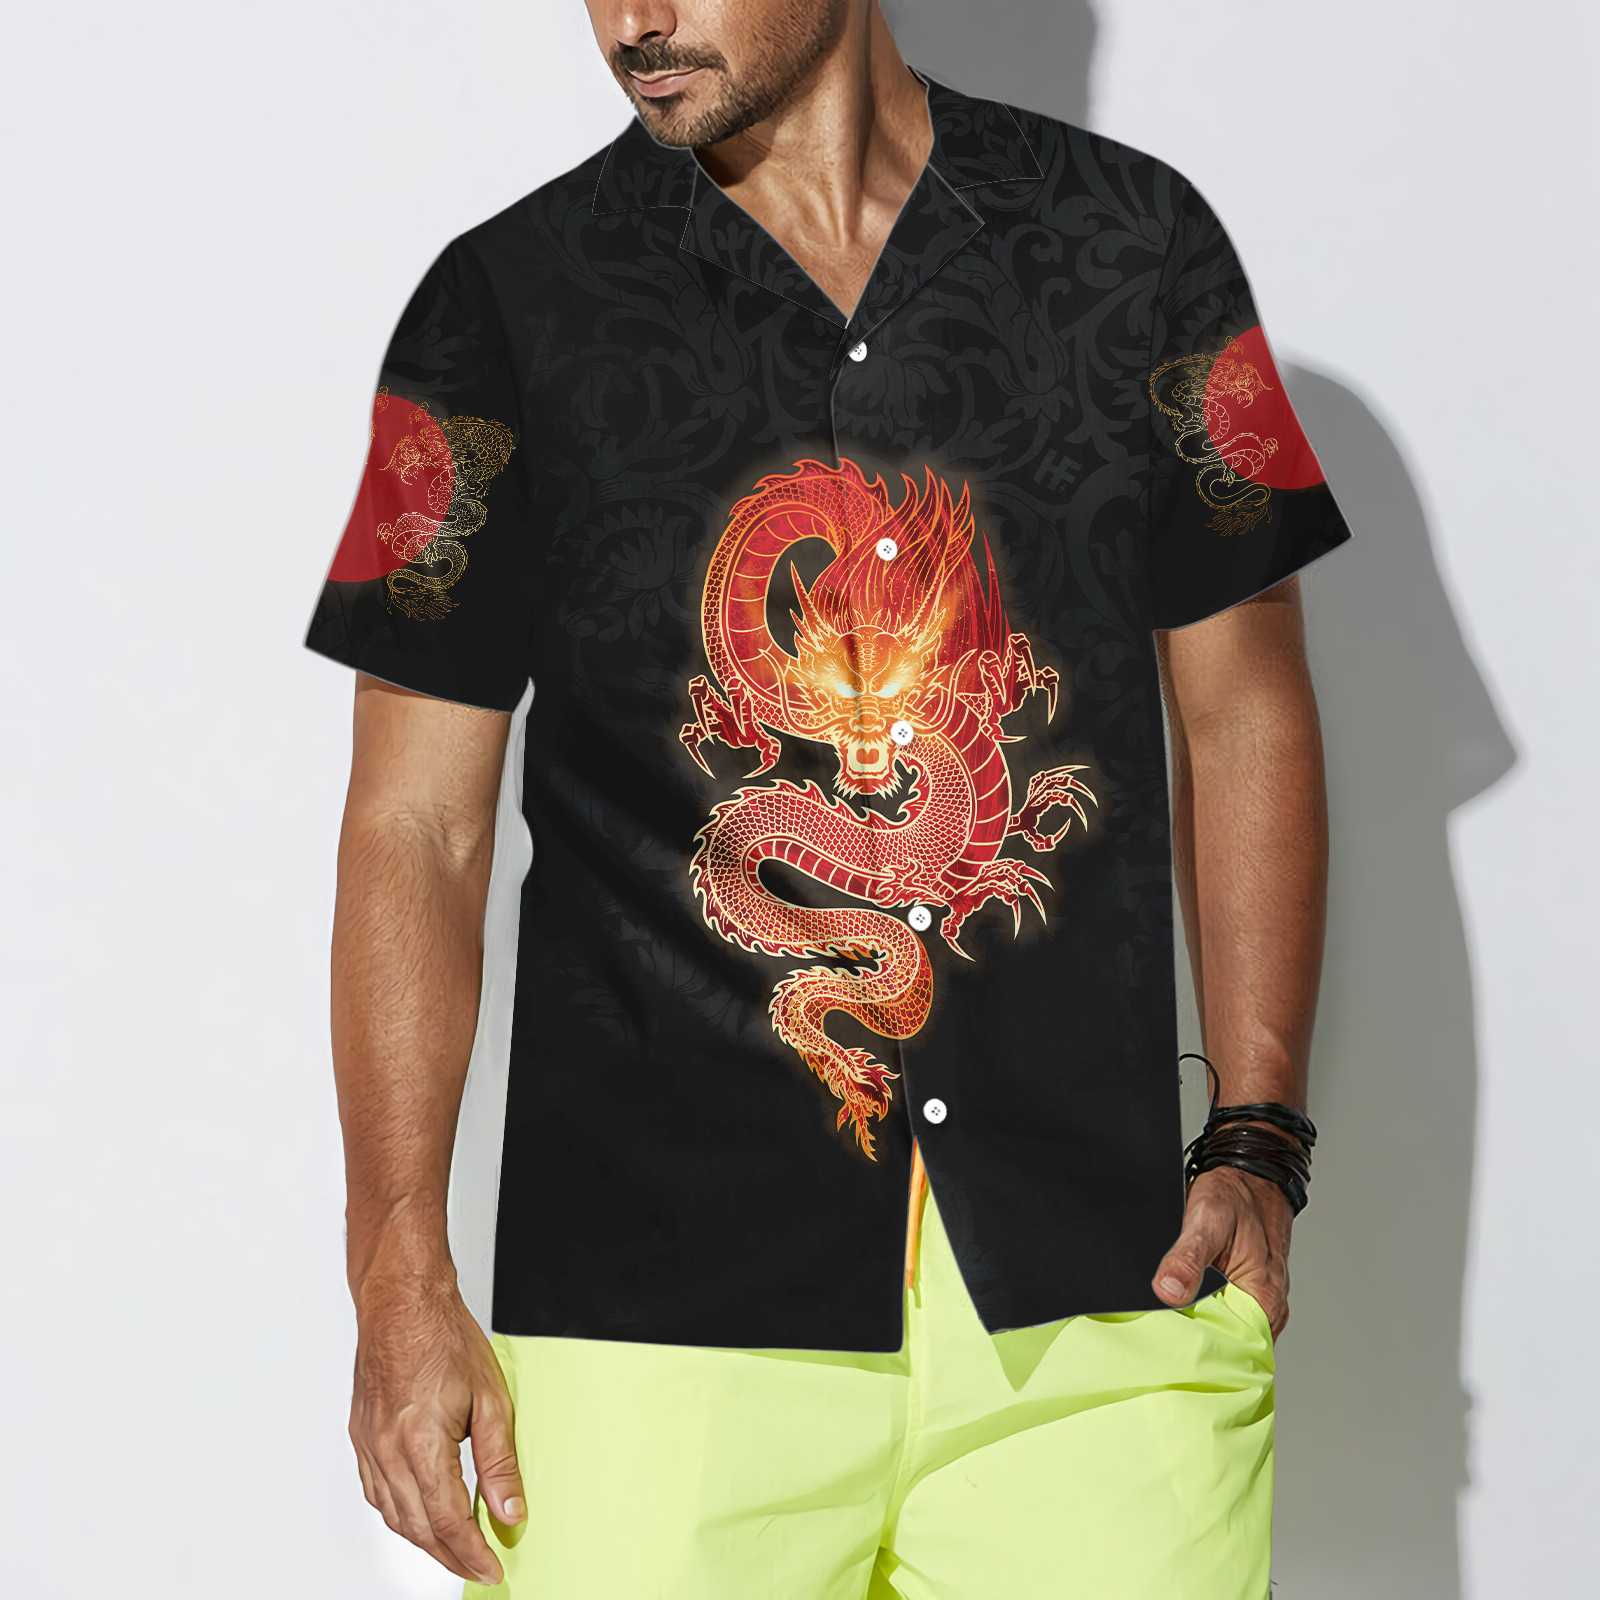 Chinese Dragon Hawaiian Shirt, Red Dragon Shirt For Men And Women, Best Gift For China Lover, Friend, Family